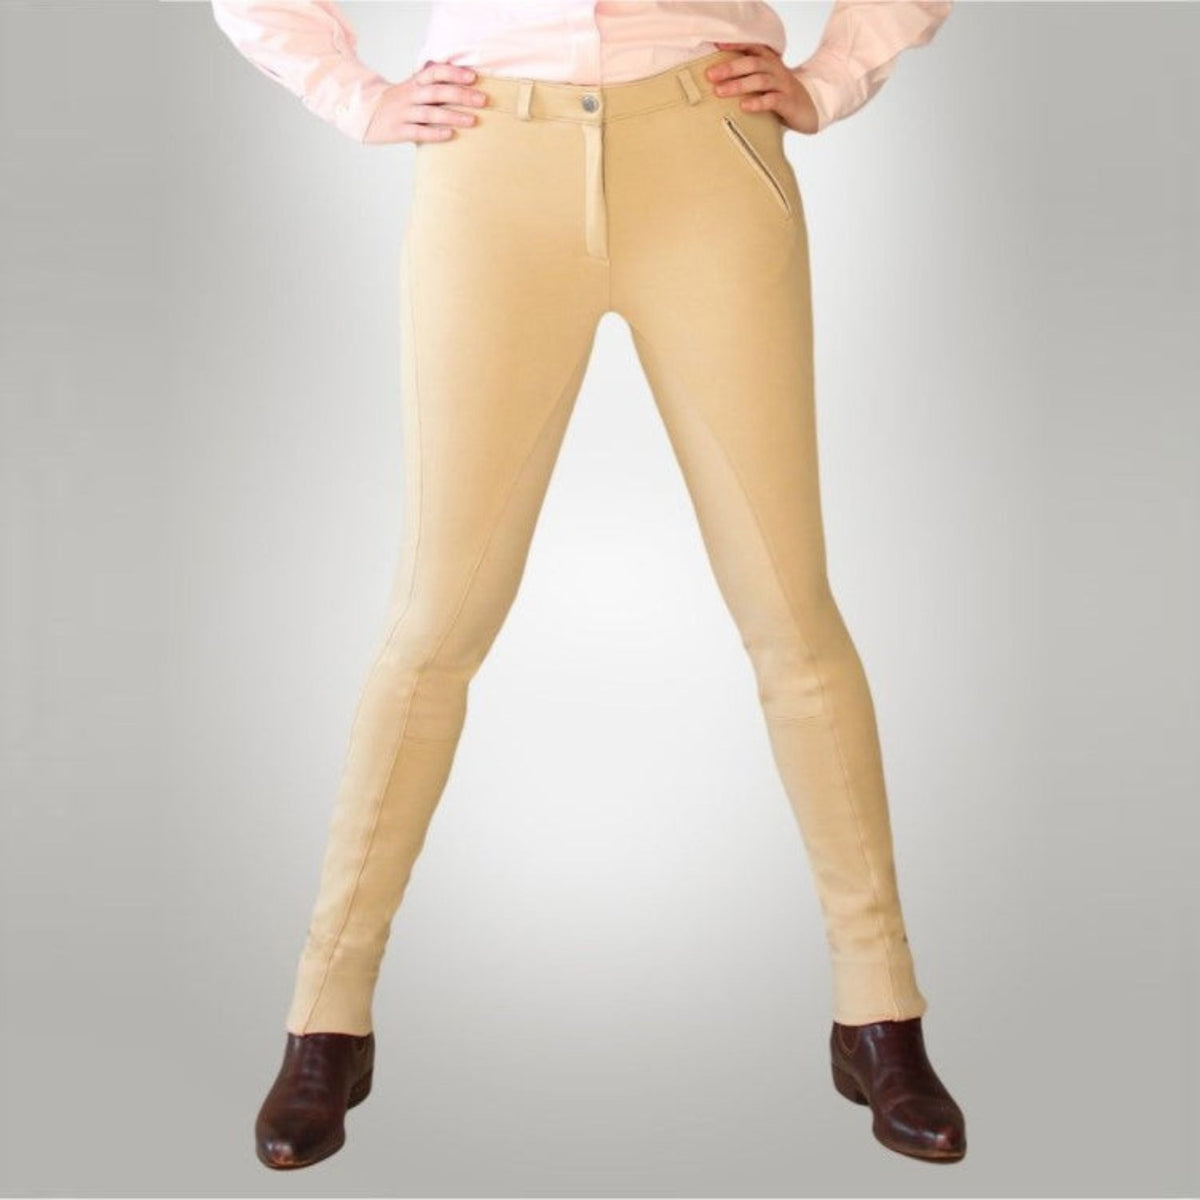 Person wearing beige jodhpurs paired with belt loops on waistband.